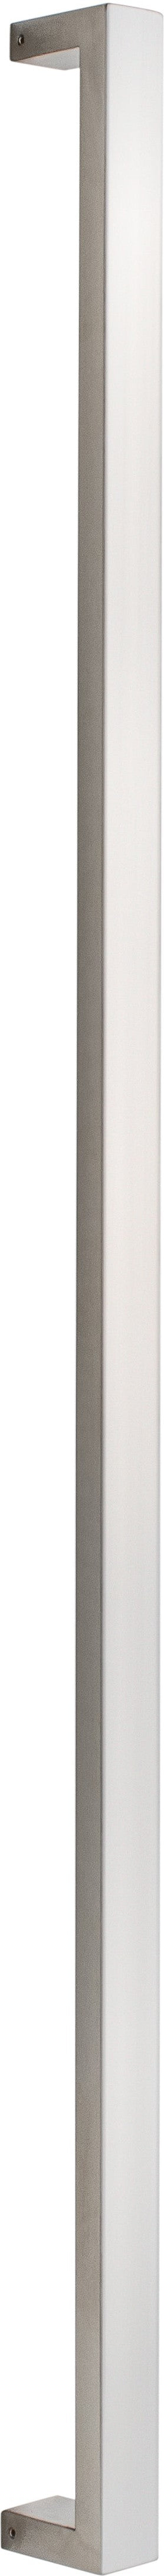 Sure-Loc 72" Square Long Door Pull, Single-Sided in Satin Stainless Steel finish